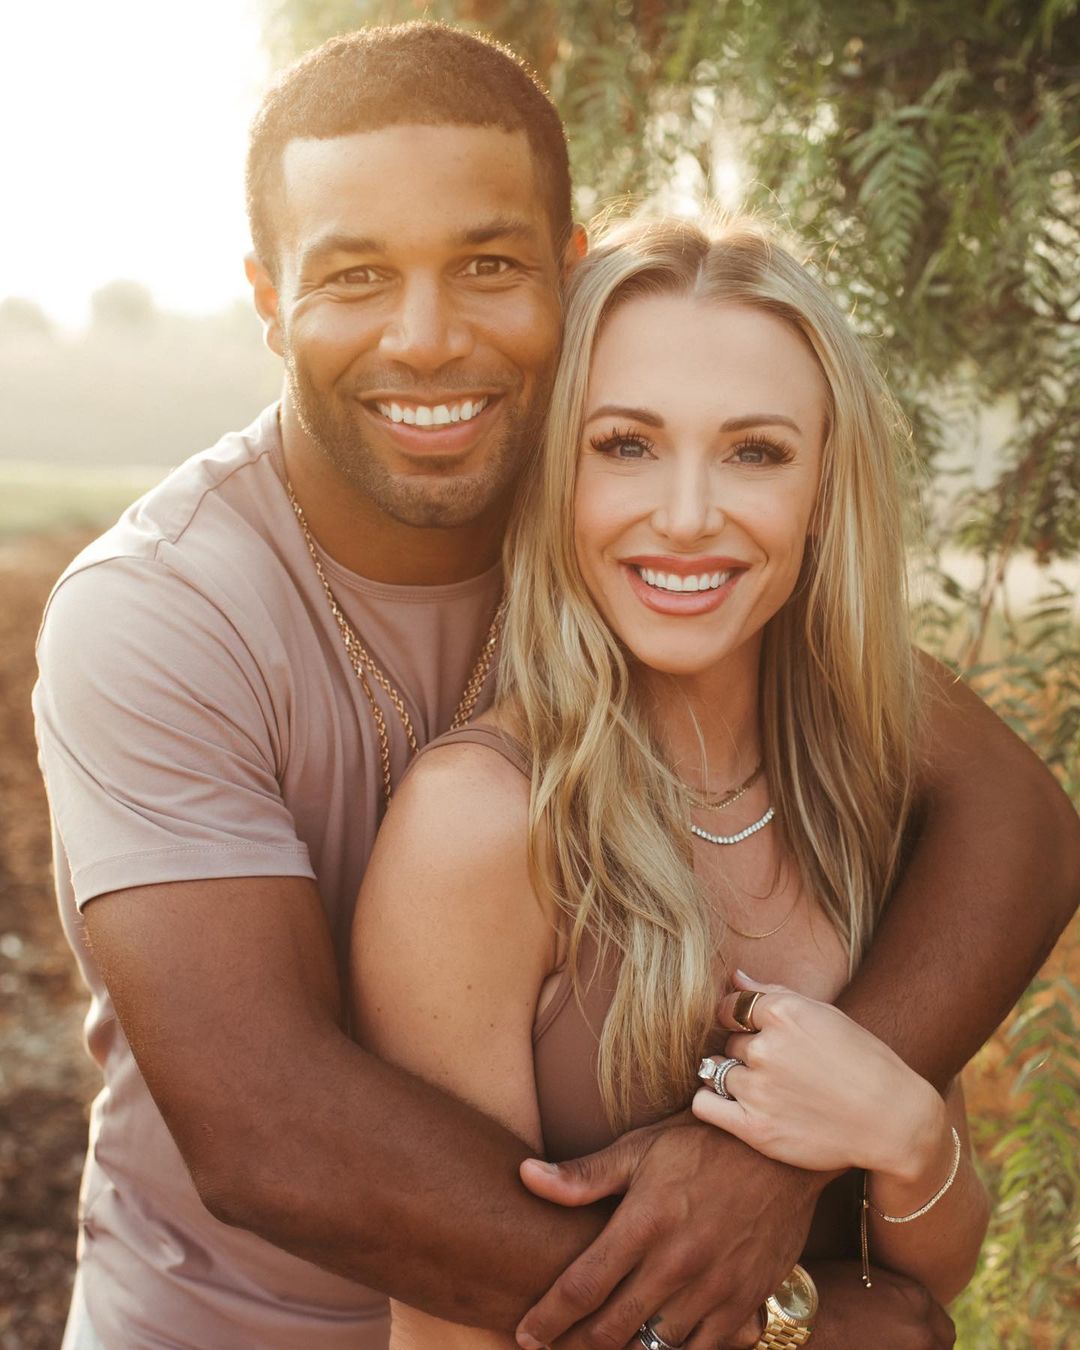  Golden Tate and his wife, Elsie Tate